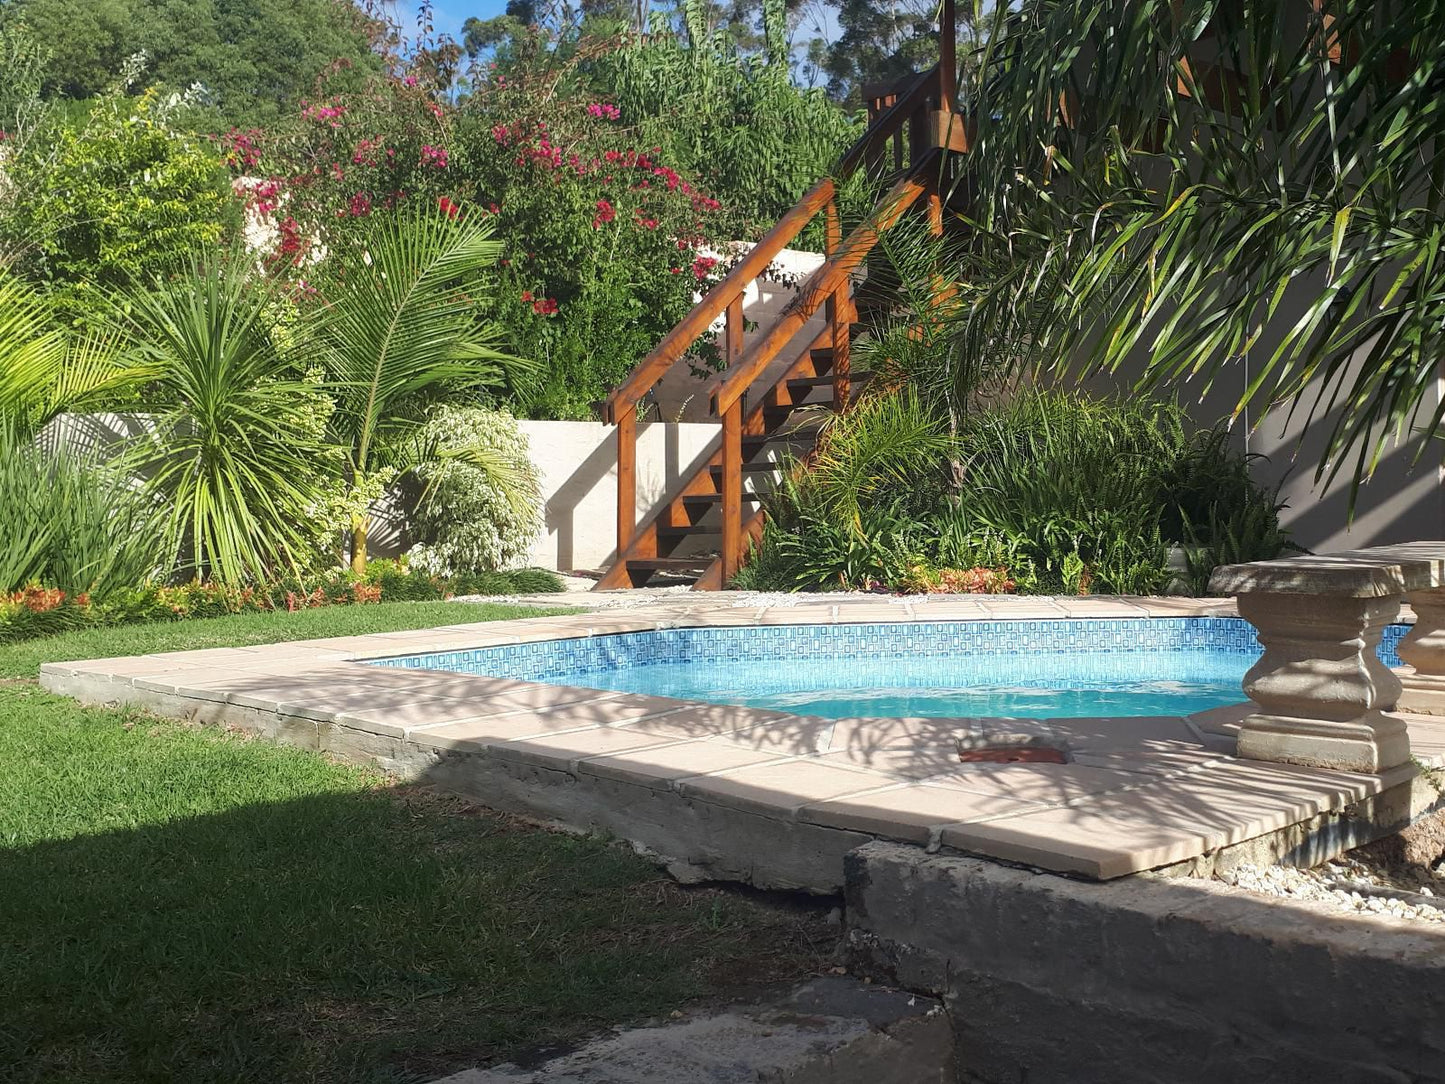 Flametree Guesthouse Swellendam Western Cape South Africa Palm Tree, Plant, Nature, Wood, Garden, Swimming Pool